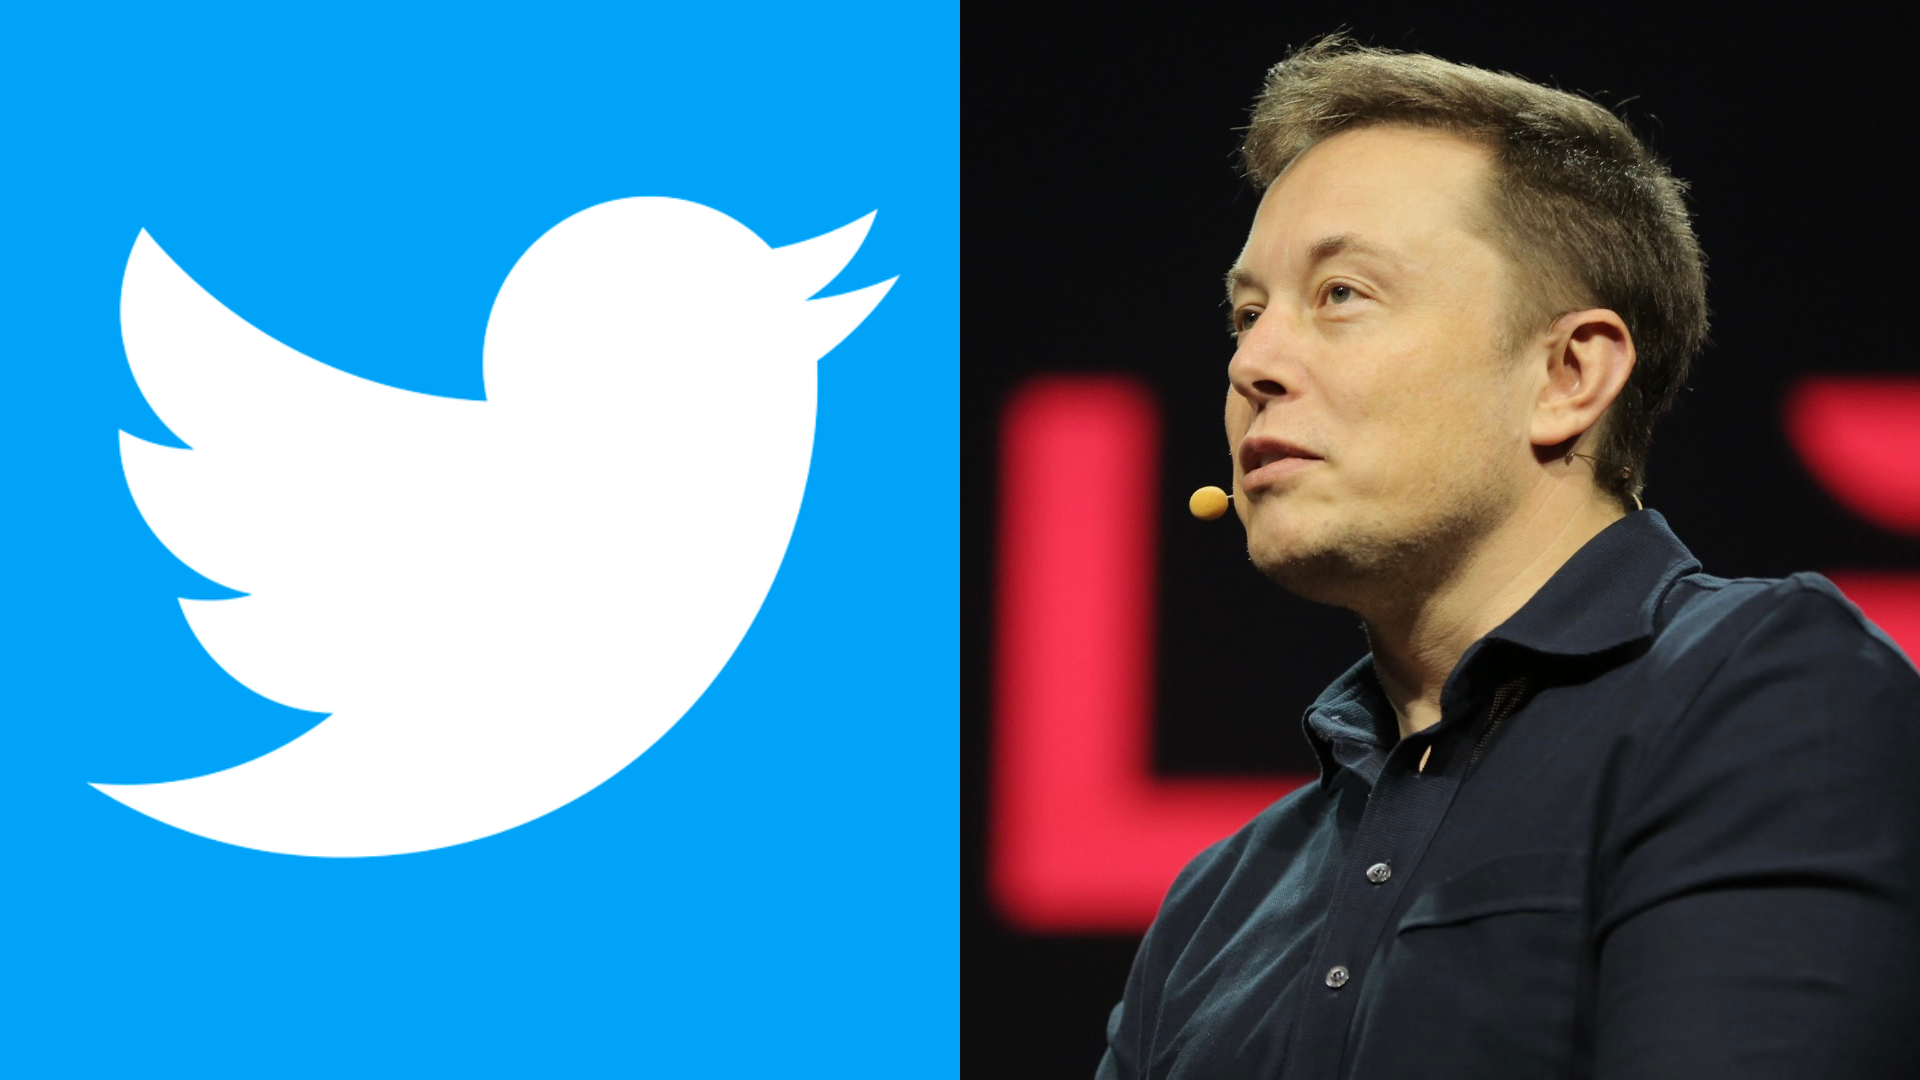 Elon Musk Proposes to Follow Through With Twitter Acquisition